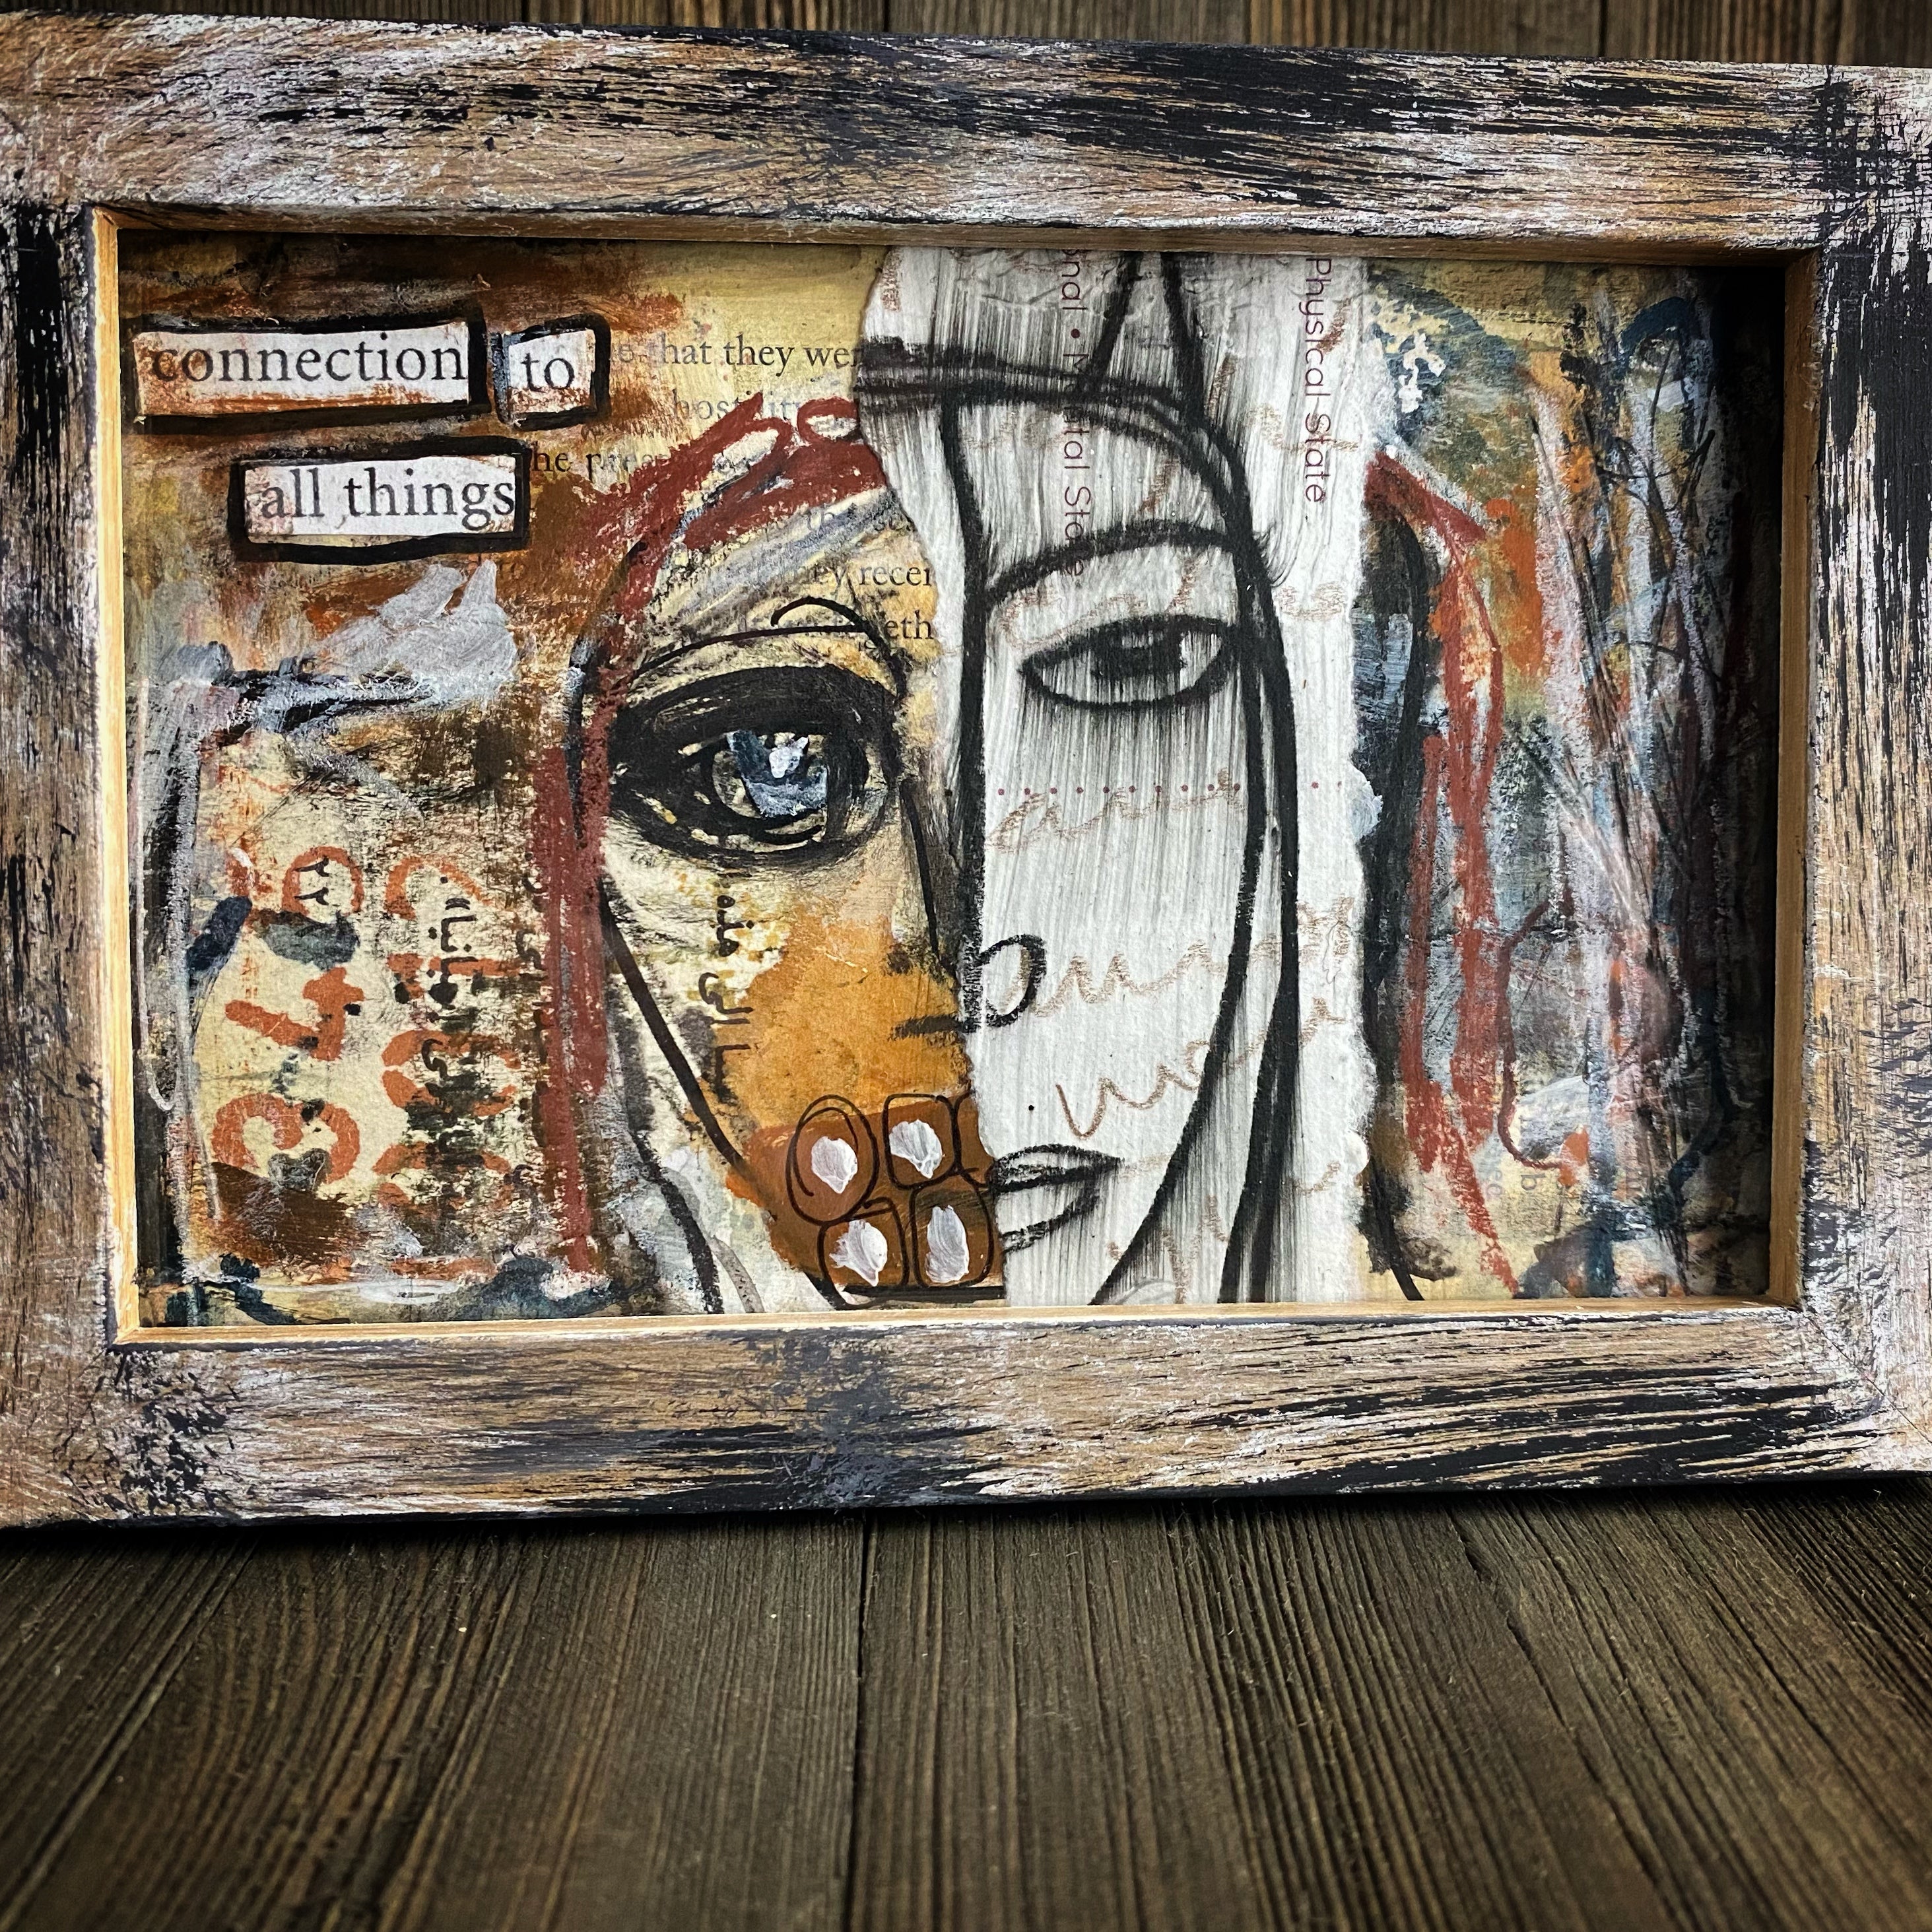 CONNECTION - Framed Original Mixed Media Collage